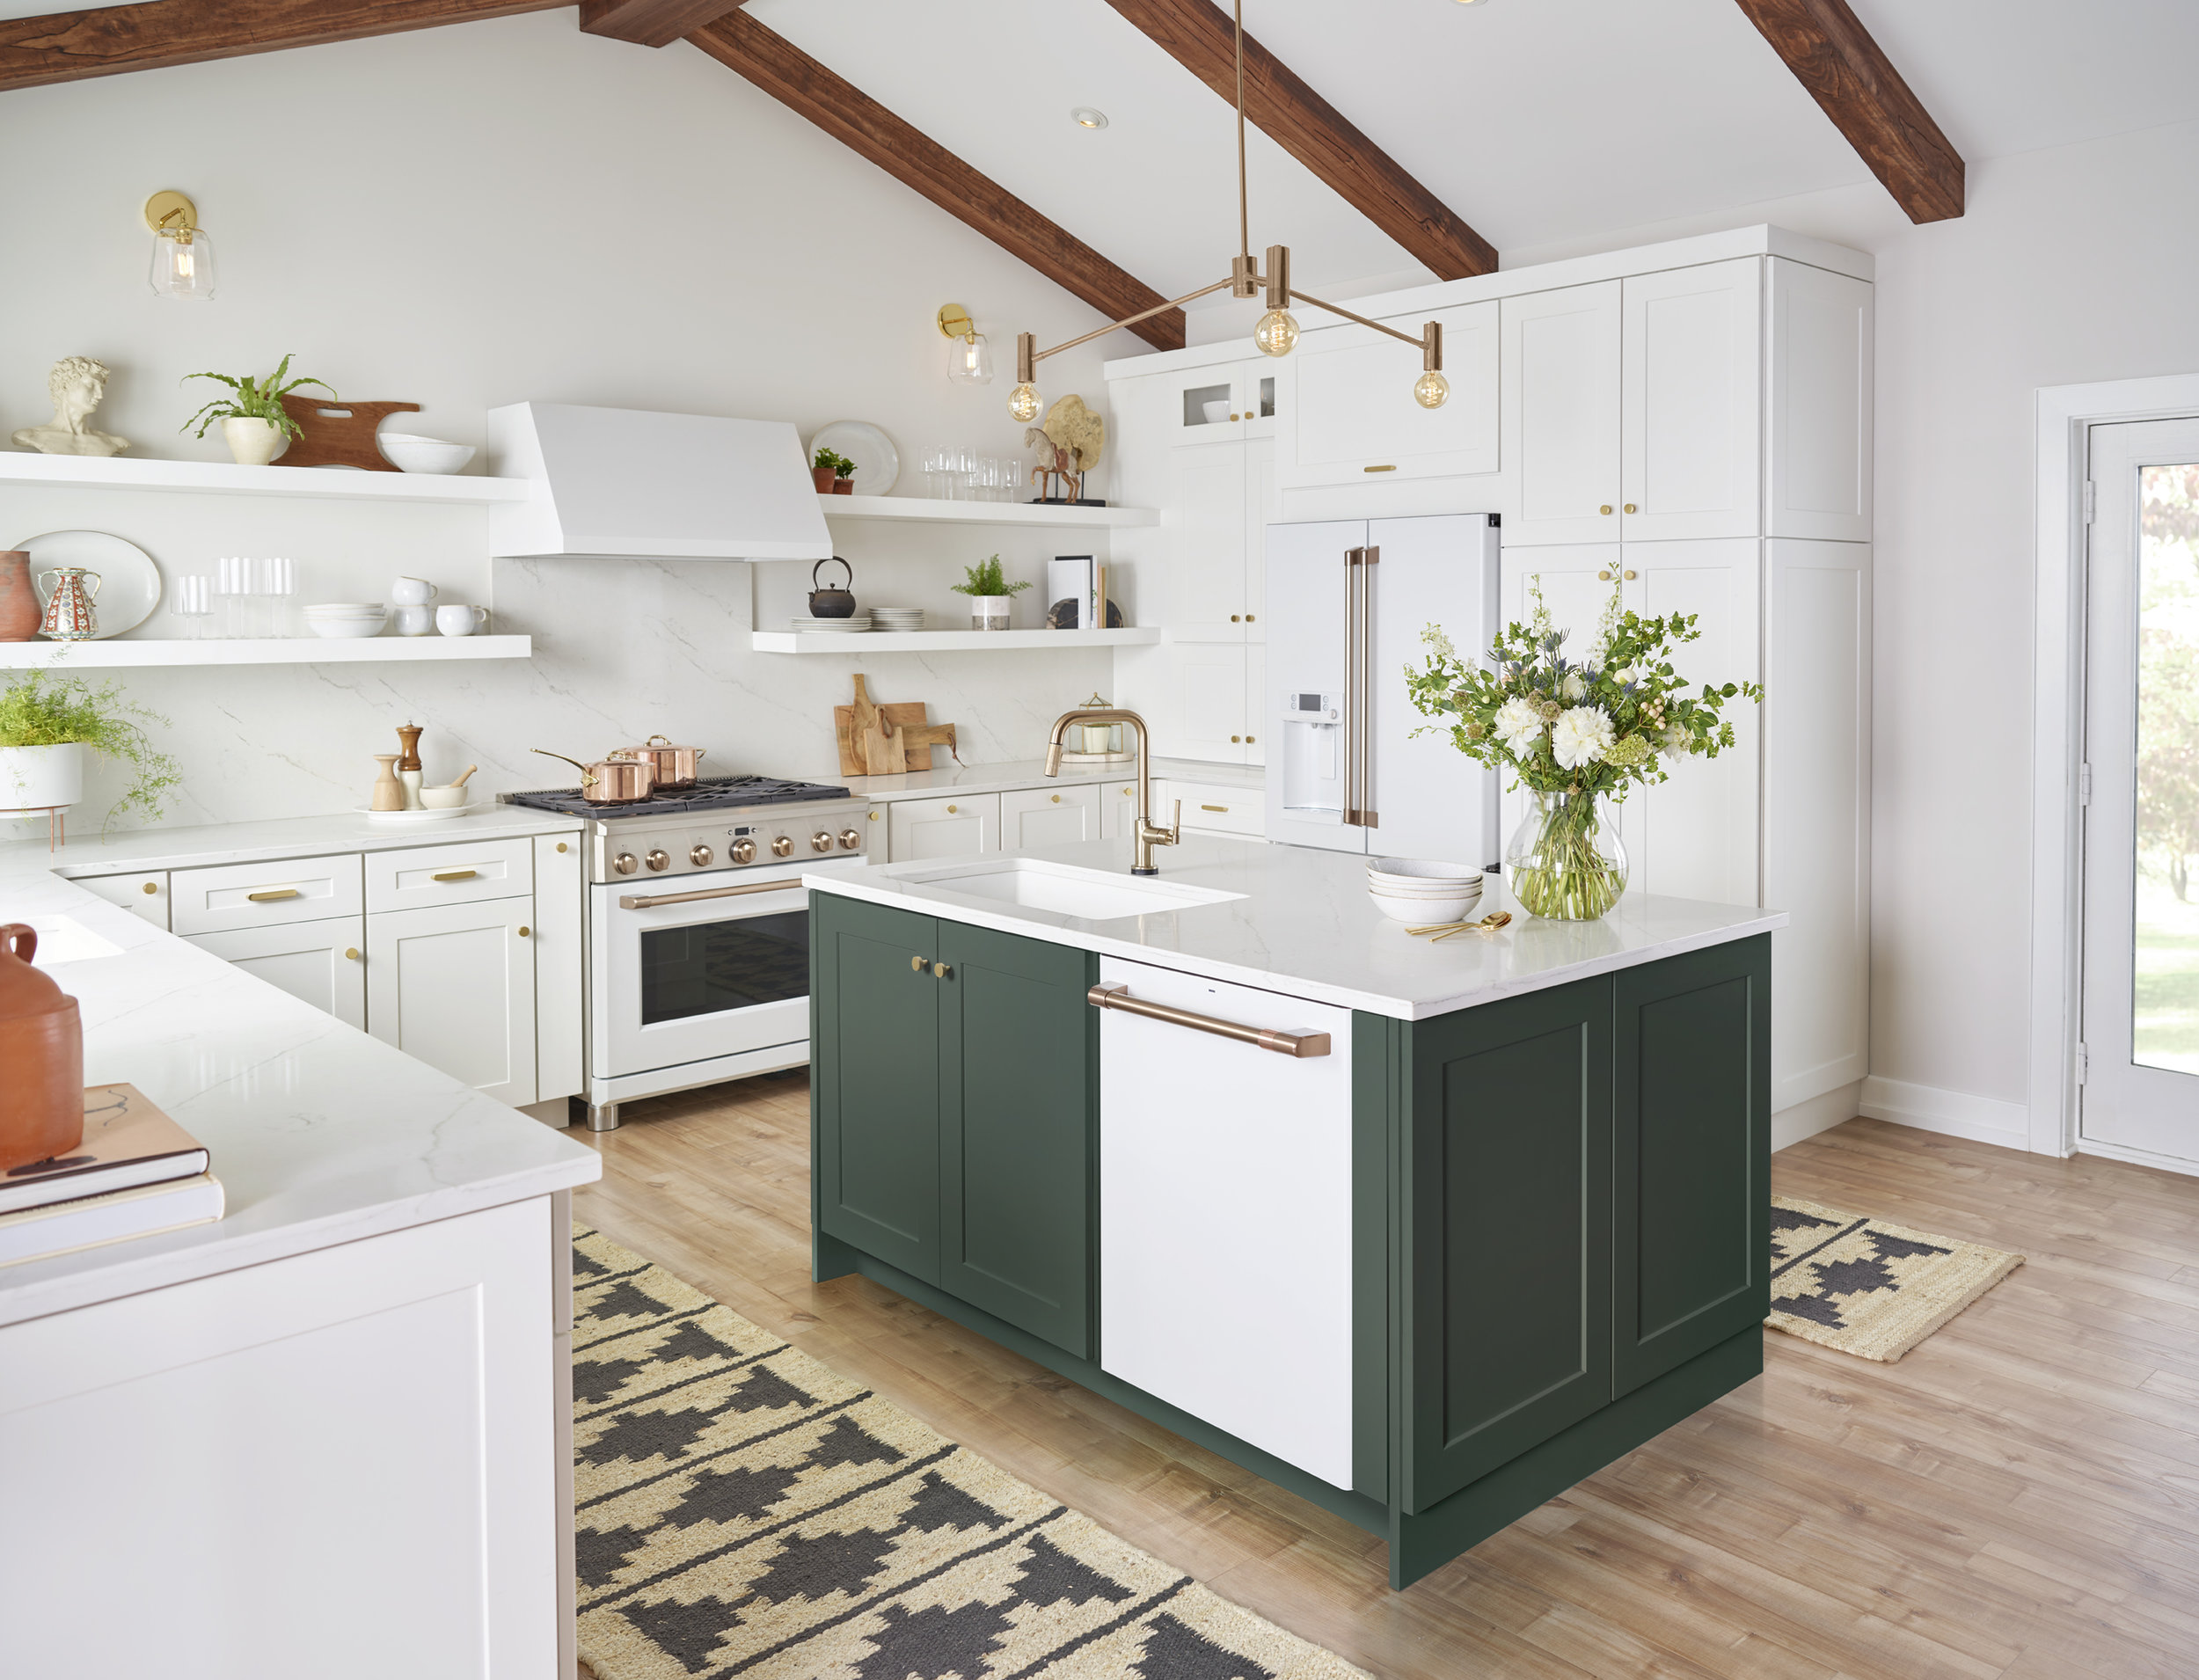 How to Match Cabinets and Appliances in Your Kitchen